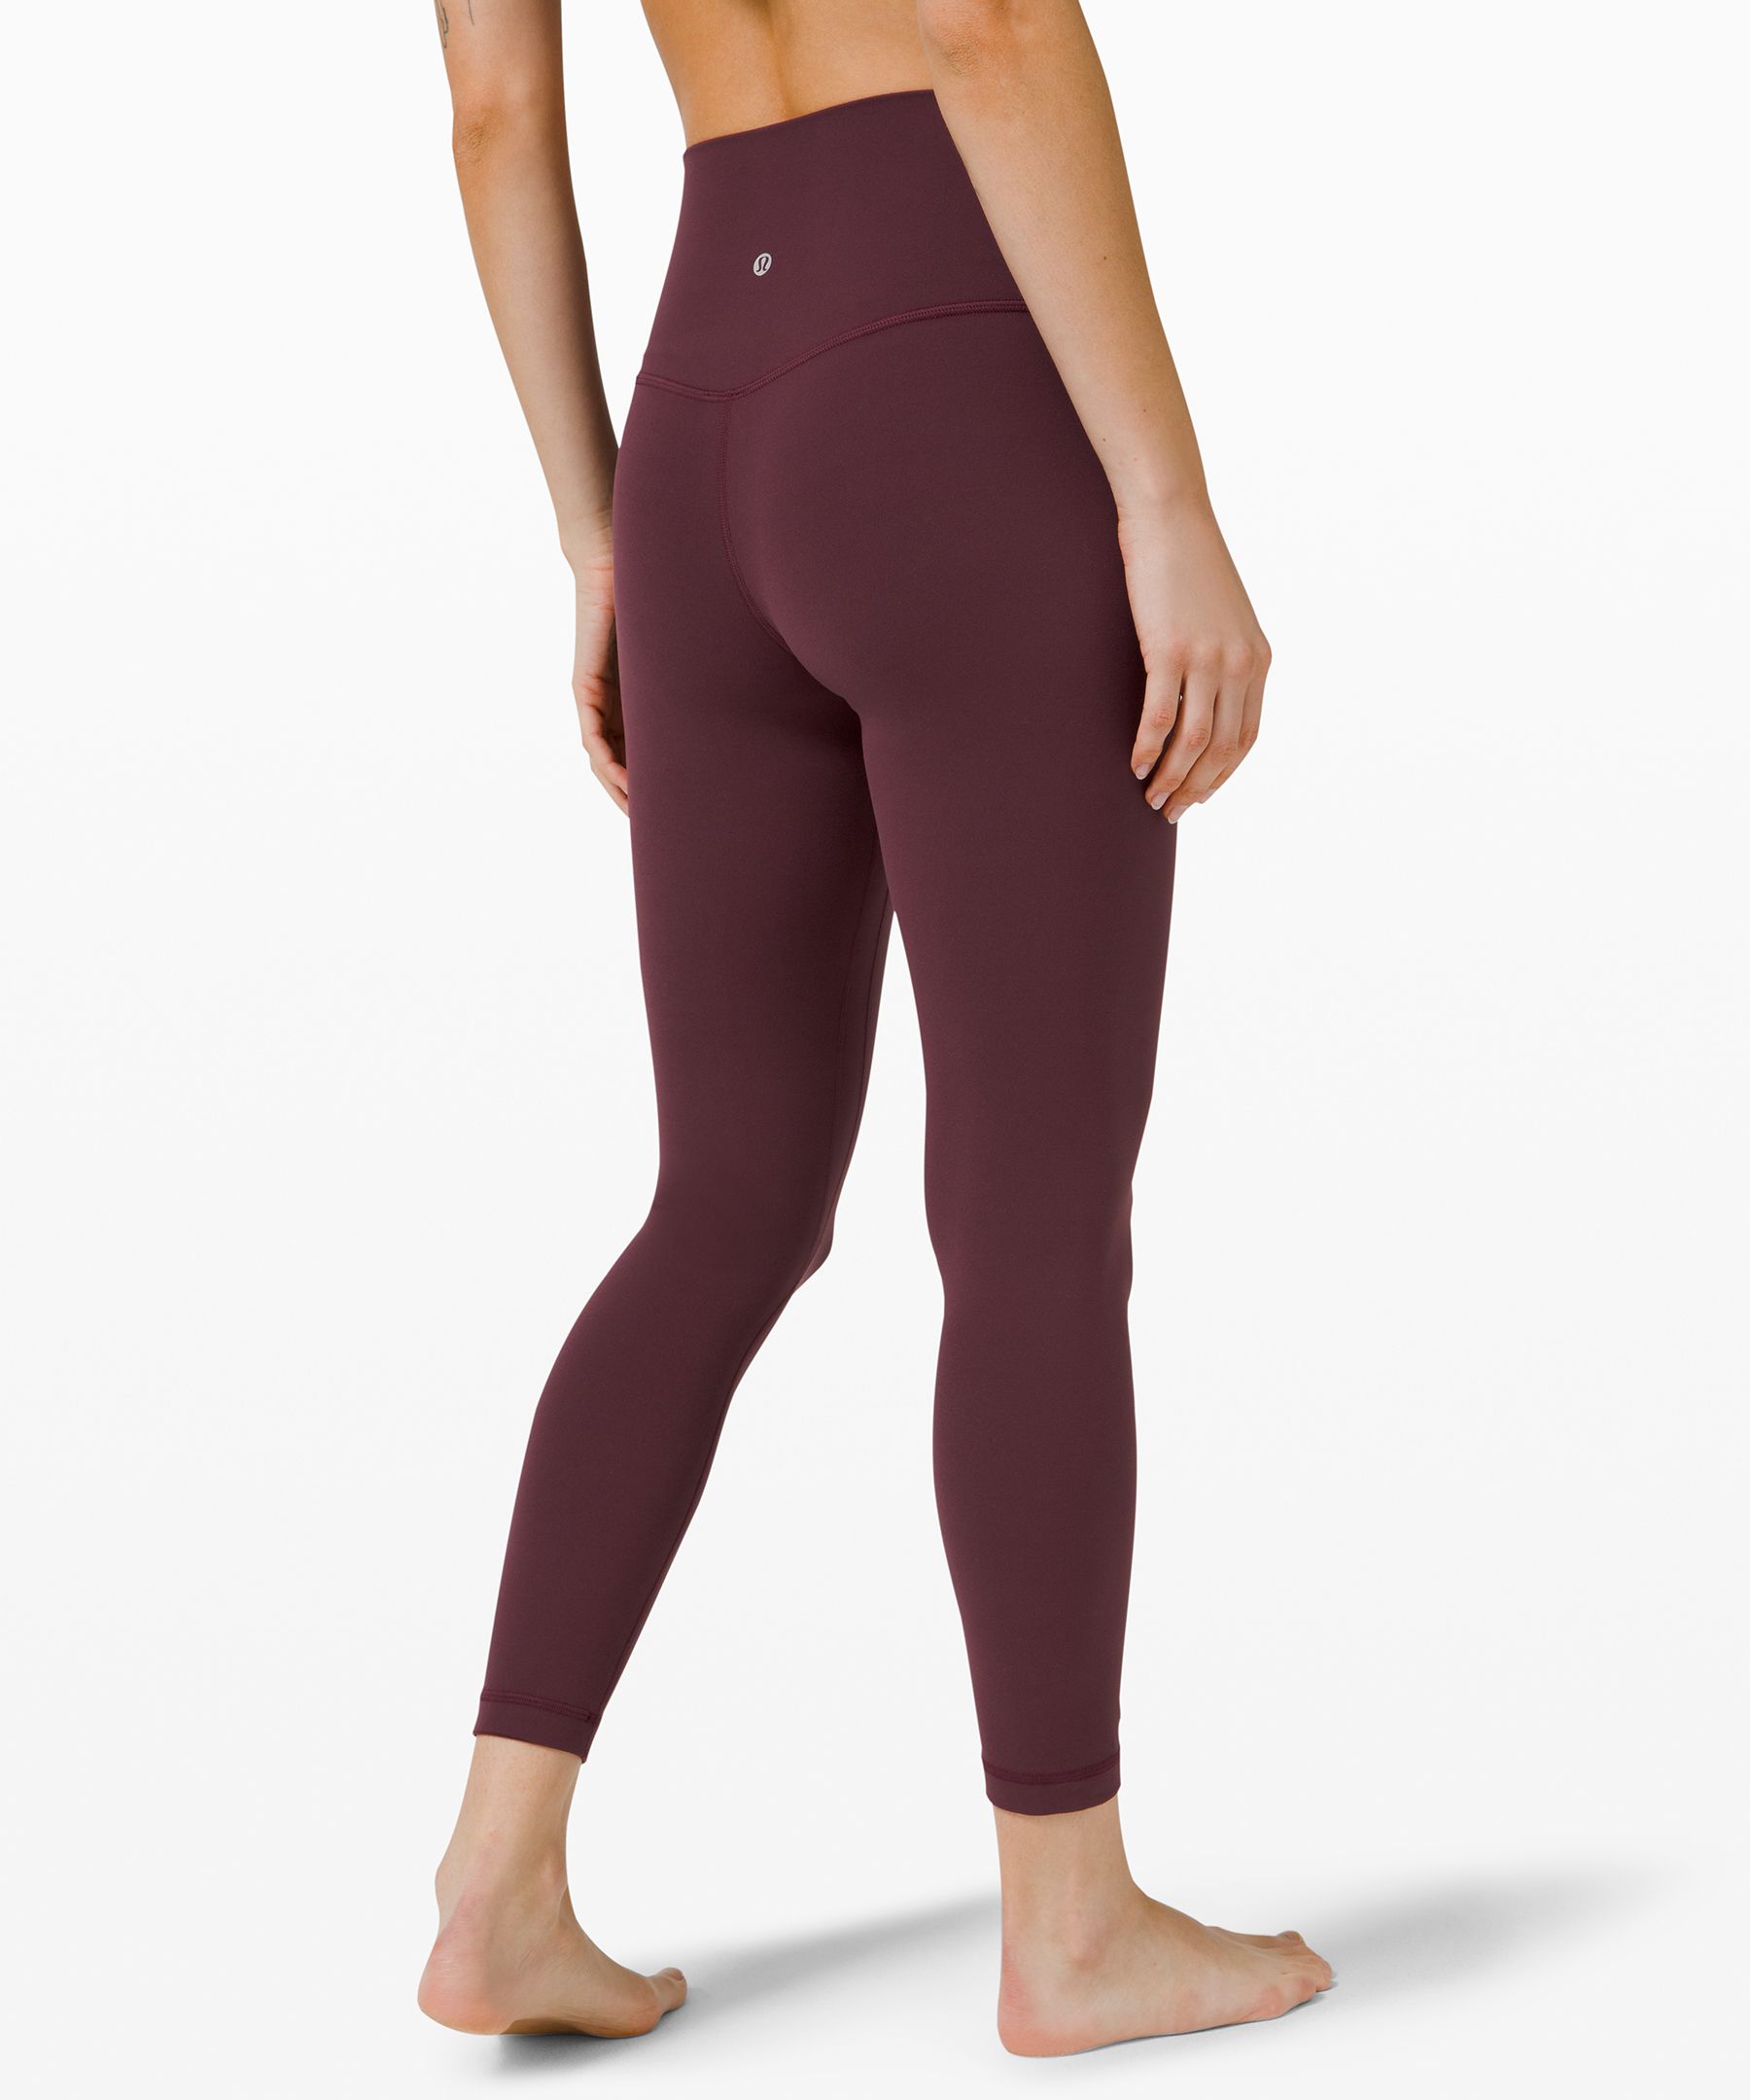 Do Lululemon Leggings Stretch Out Over Time4learning